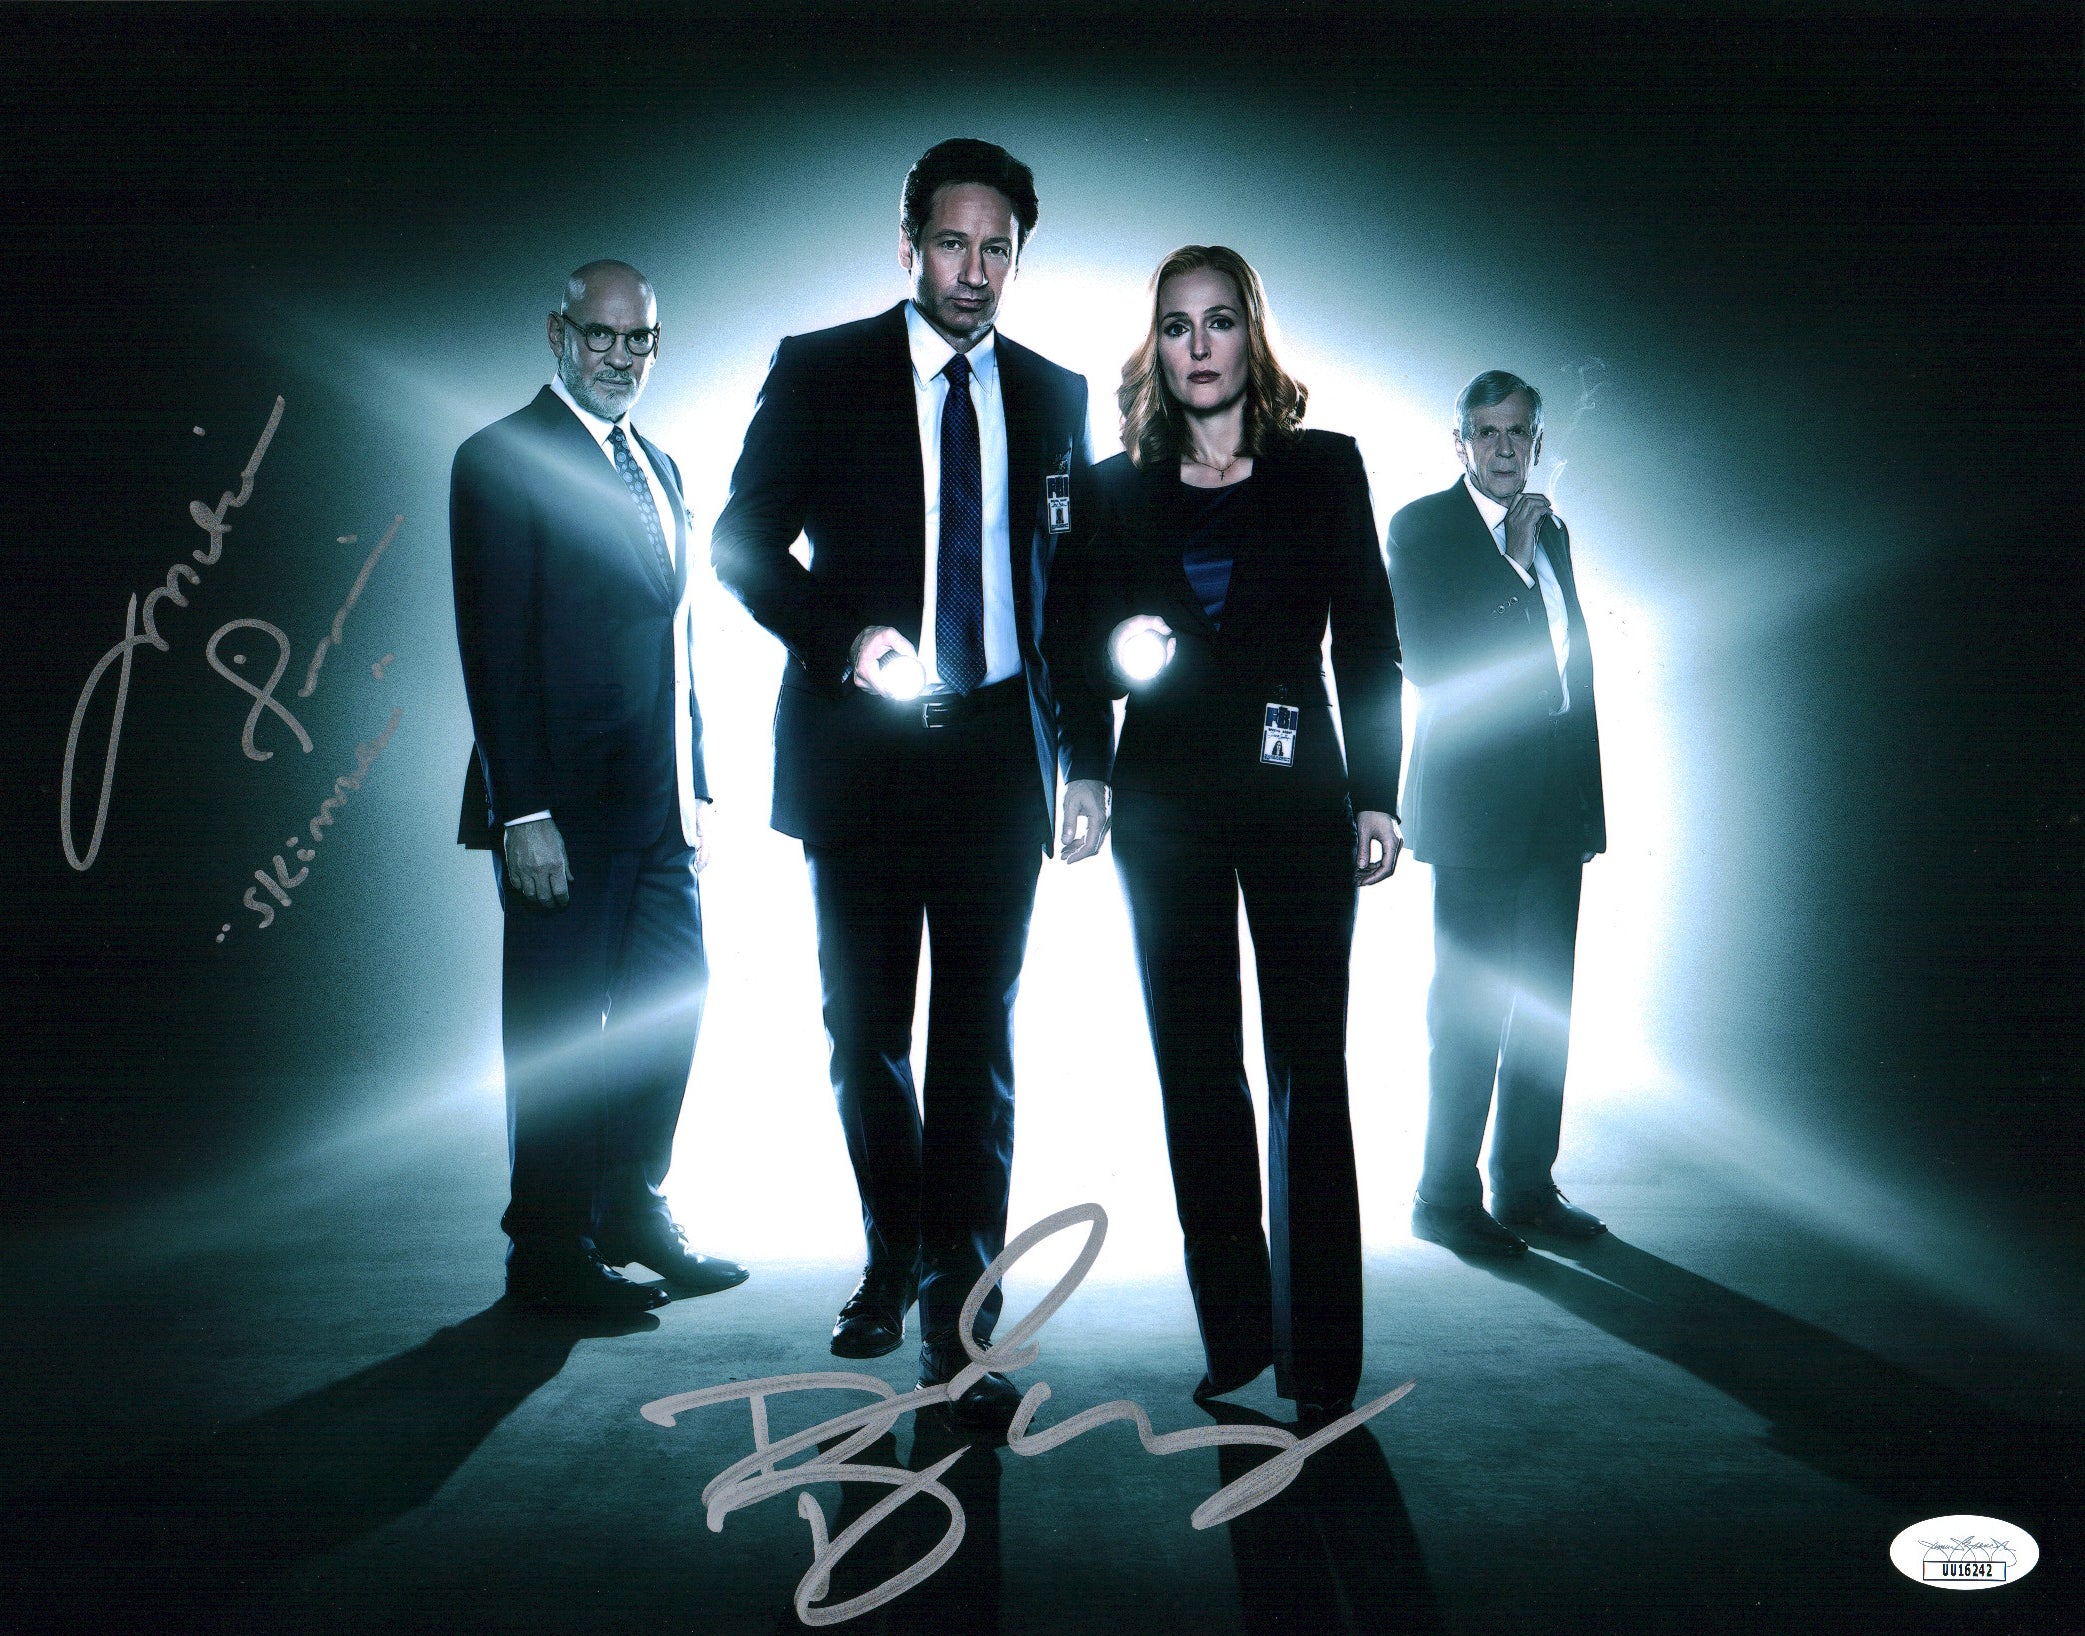 The X Files 11x14 Photo Poster Cast x2 Signed Duchovny, Pileggi JSA Certified Autograph